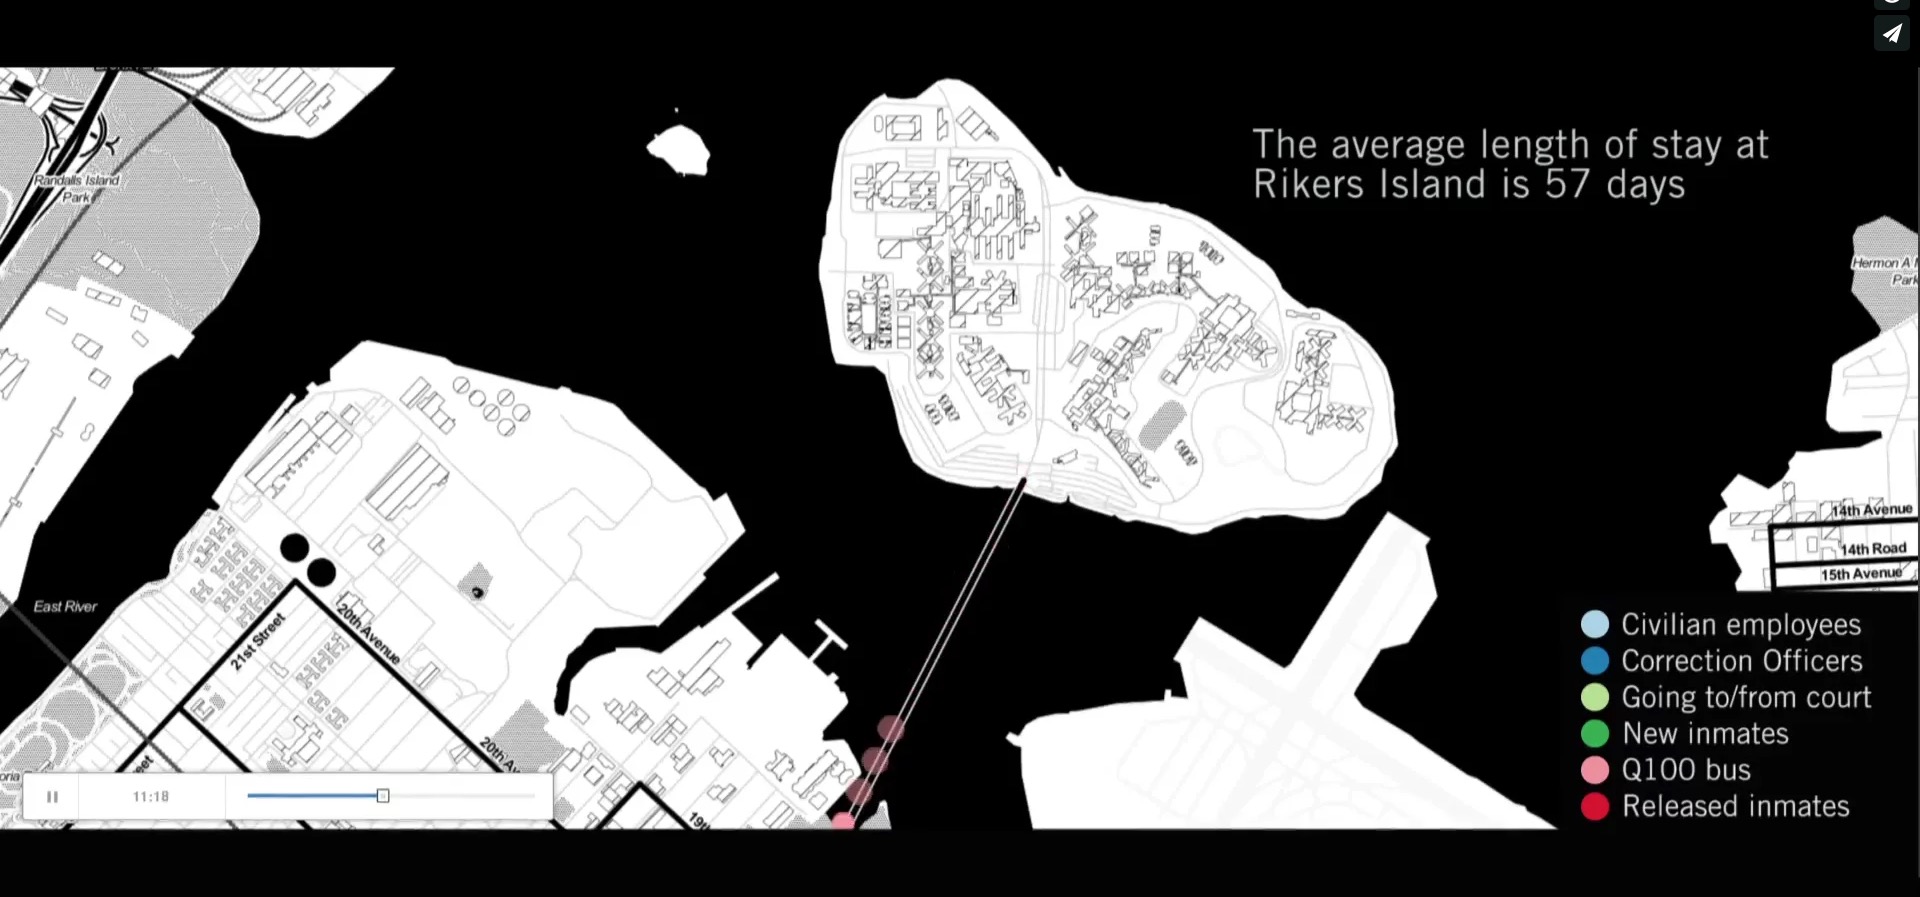 Audio Visual Essay: A Day in the Life of the Rikers Island Bridge